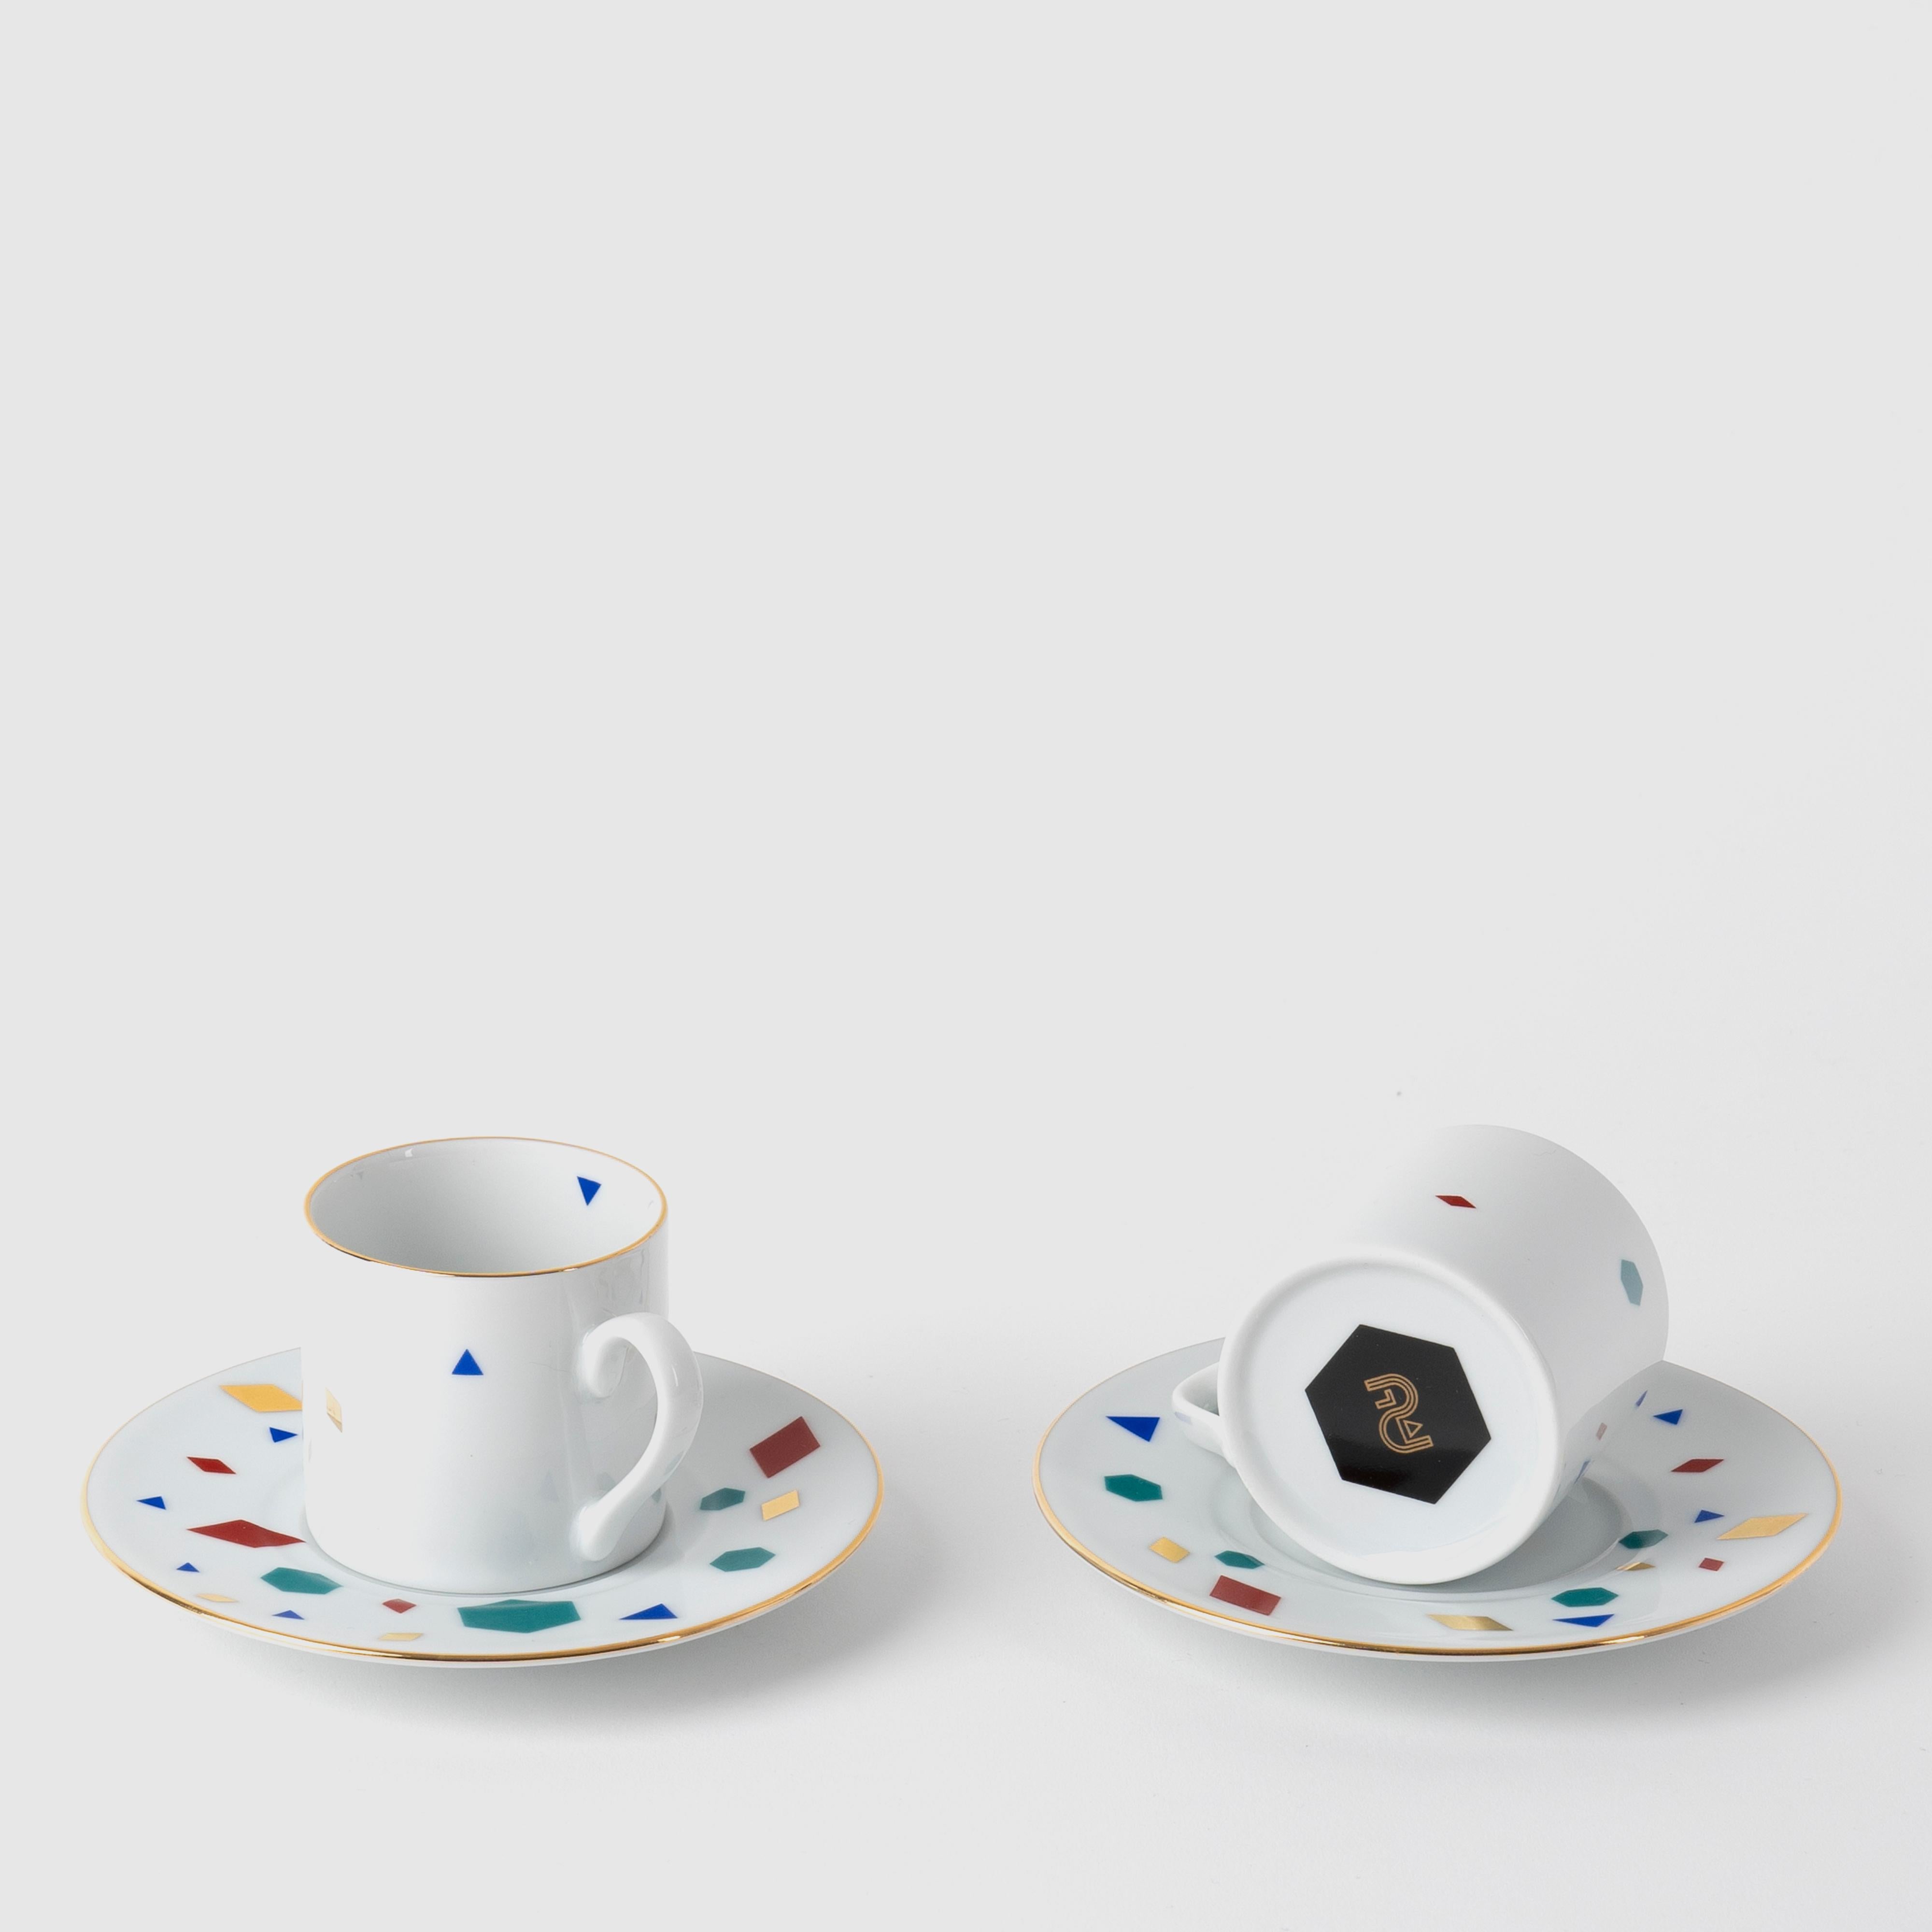 Contemporary Modern, Çini Decorated Porcelain Coffee Cup &Saucer 90ml, Set of 2  For Sale 1